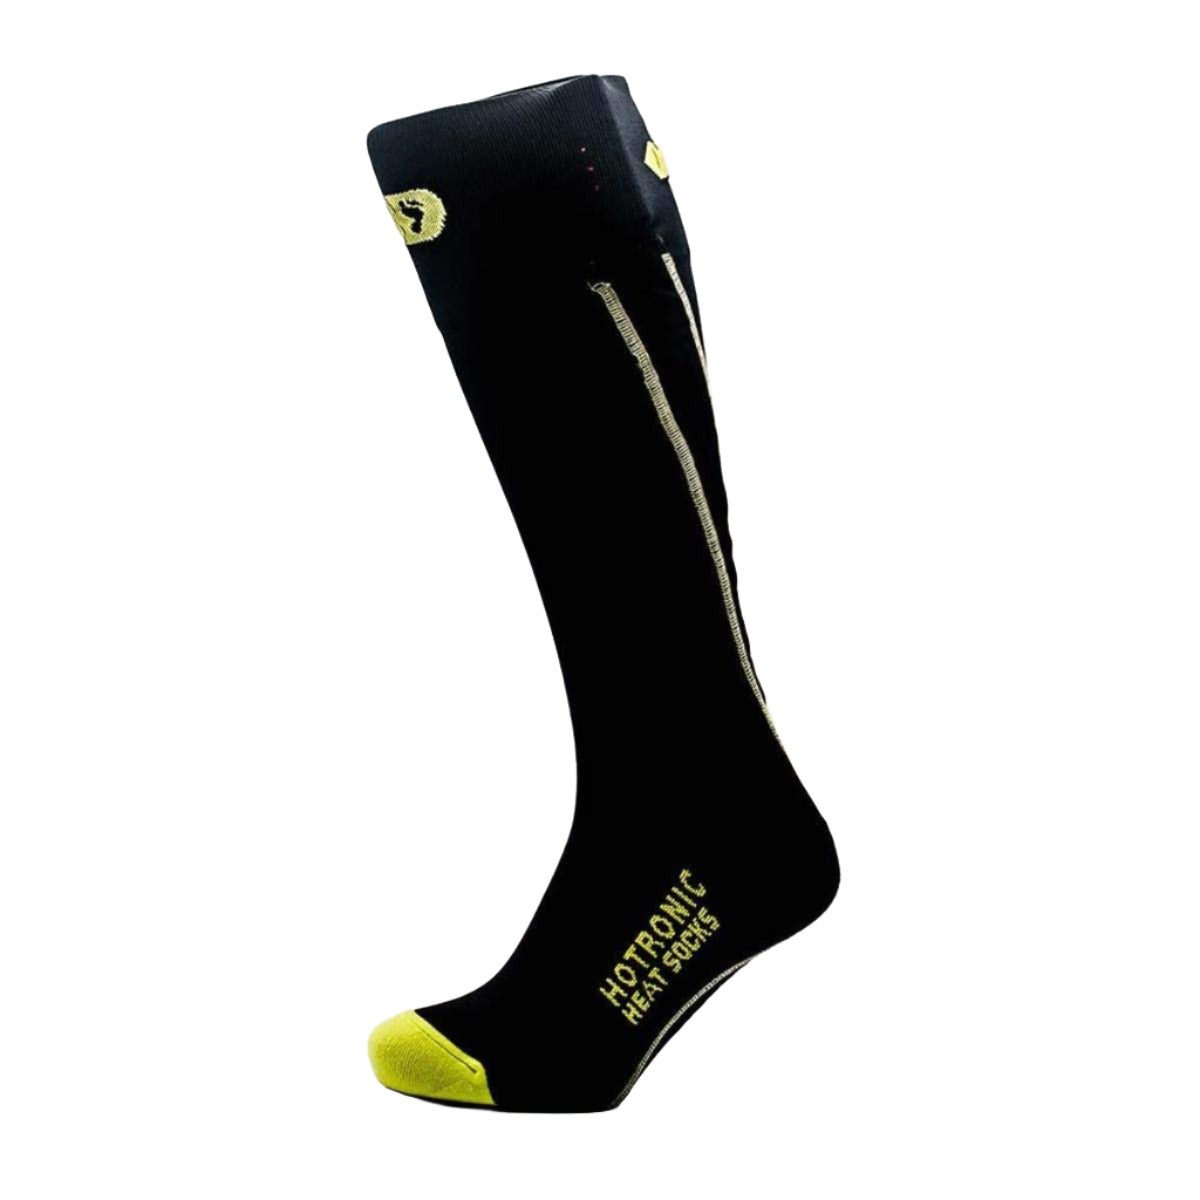 Hotronic Heat Socks Only XLP PFI 30 Classic Thin Pair XS-XL - DISCONTINUED HEATED ACCESSORIES Hotronic XS  